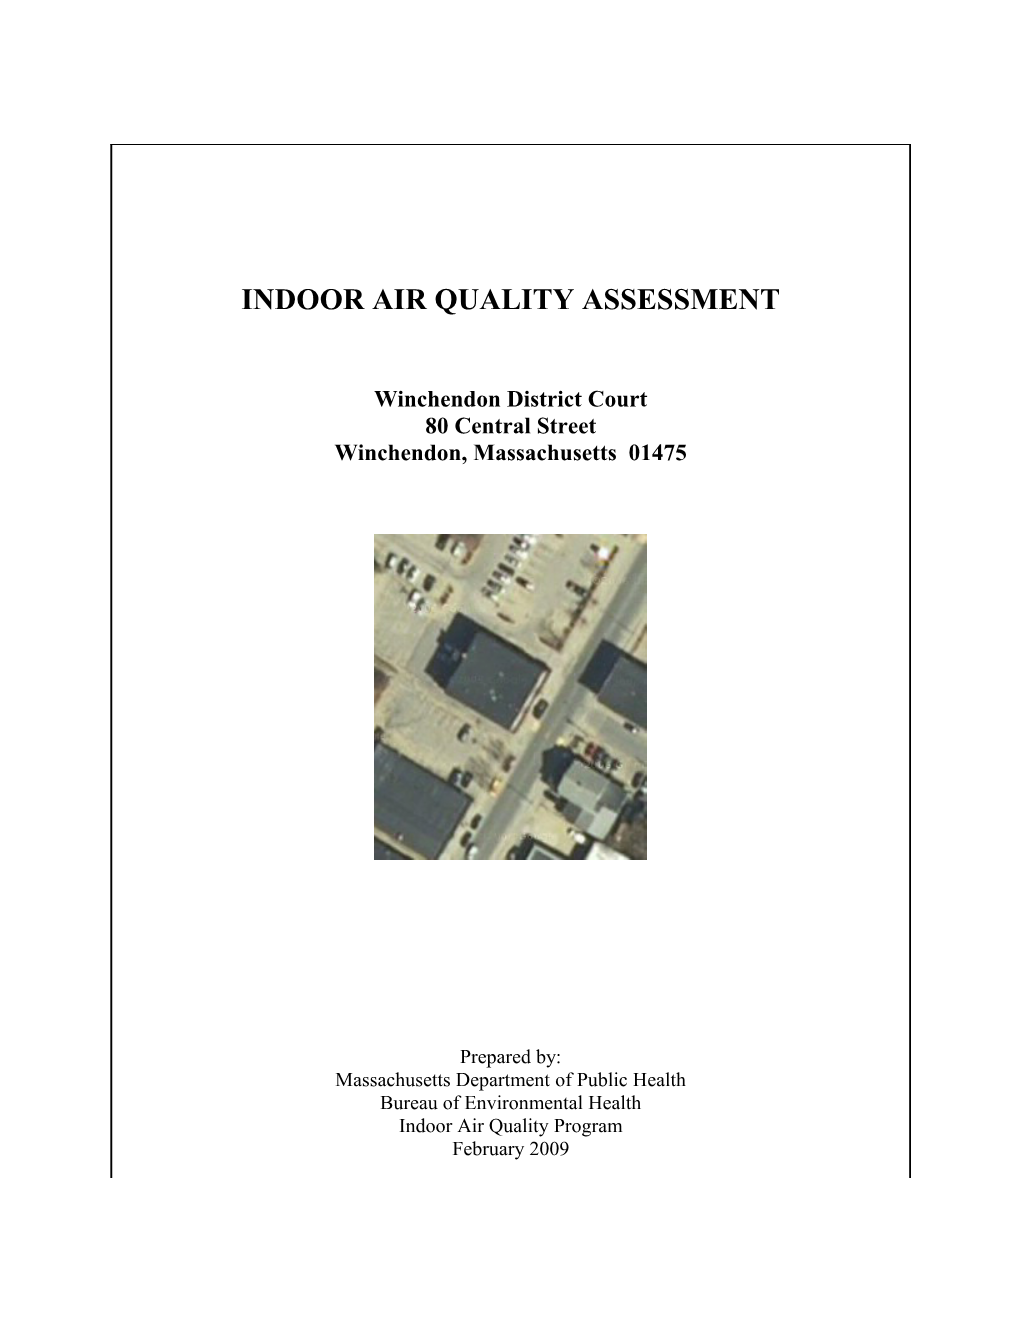 Indoor Air Quality Assessment - Winchendon District Court